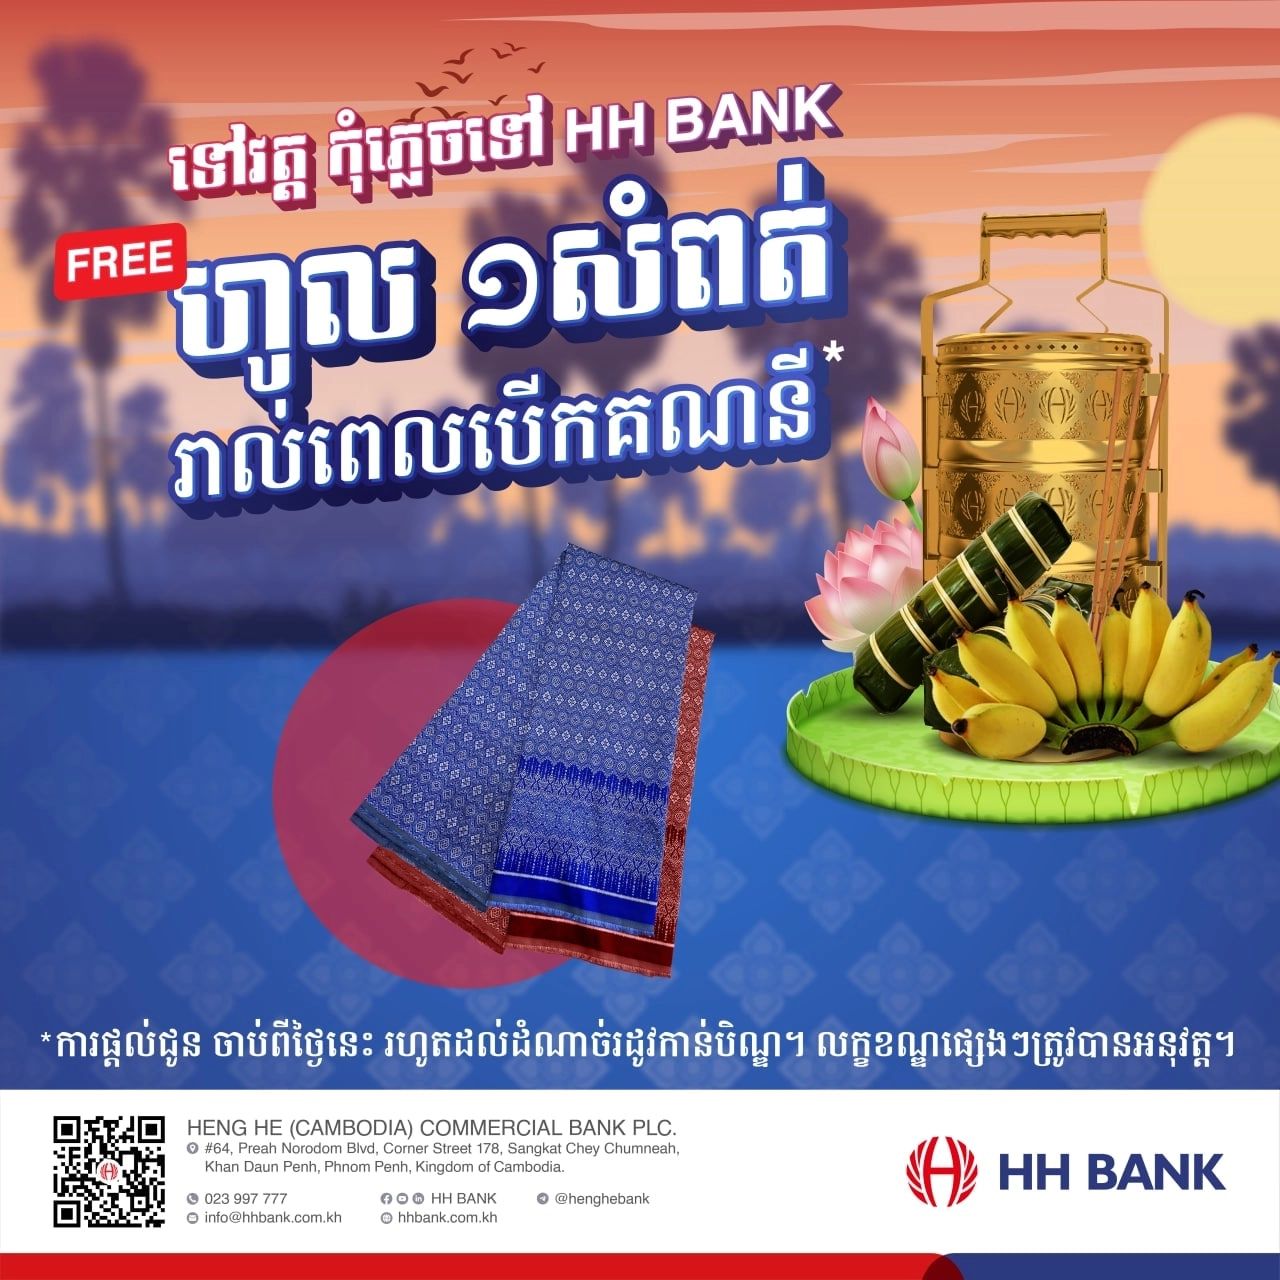 Get a FREE beautiful Khmer silk from HH BANK...